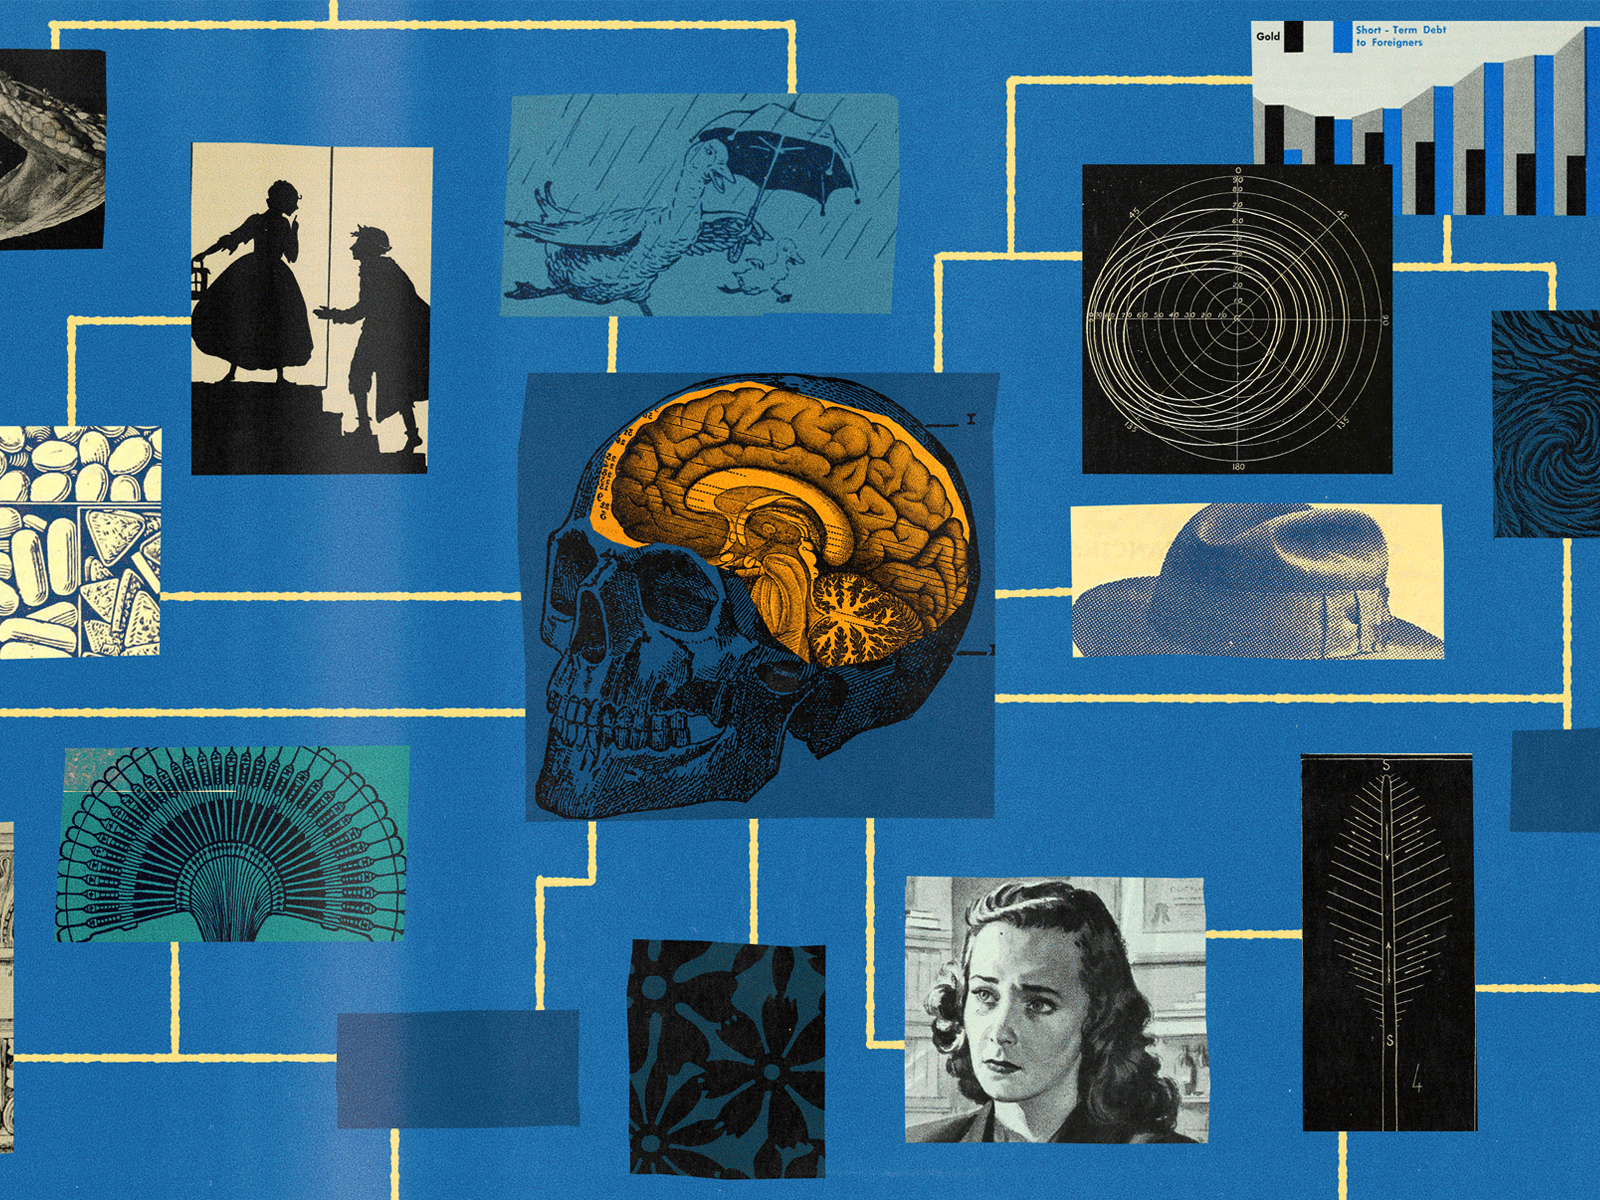 A Guide to Lateral Thinking collage creativity editorial illustration found image illustration lateral thinking